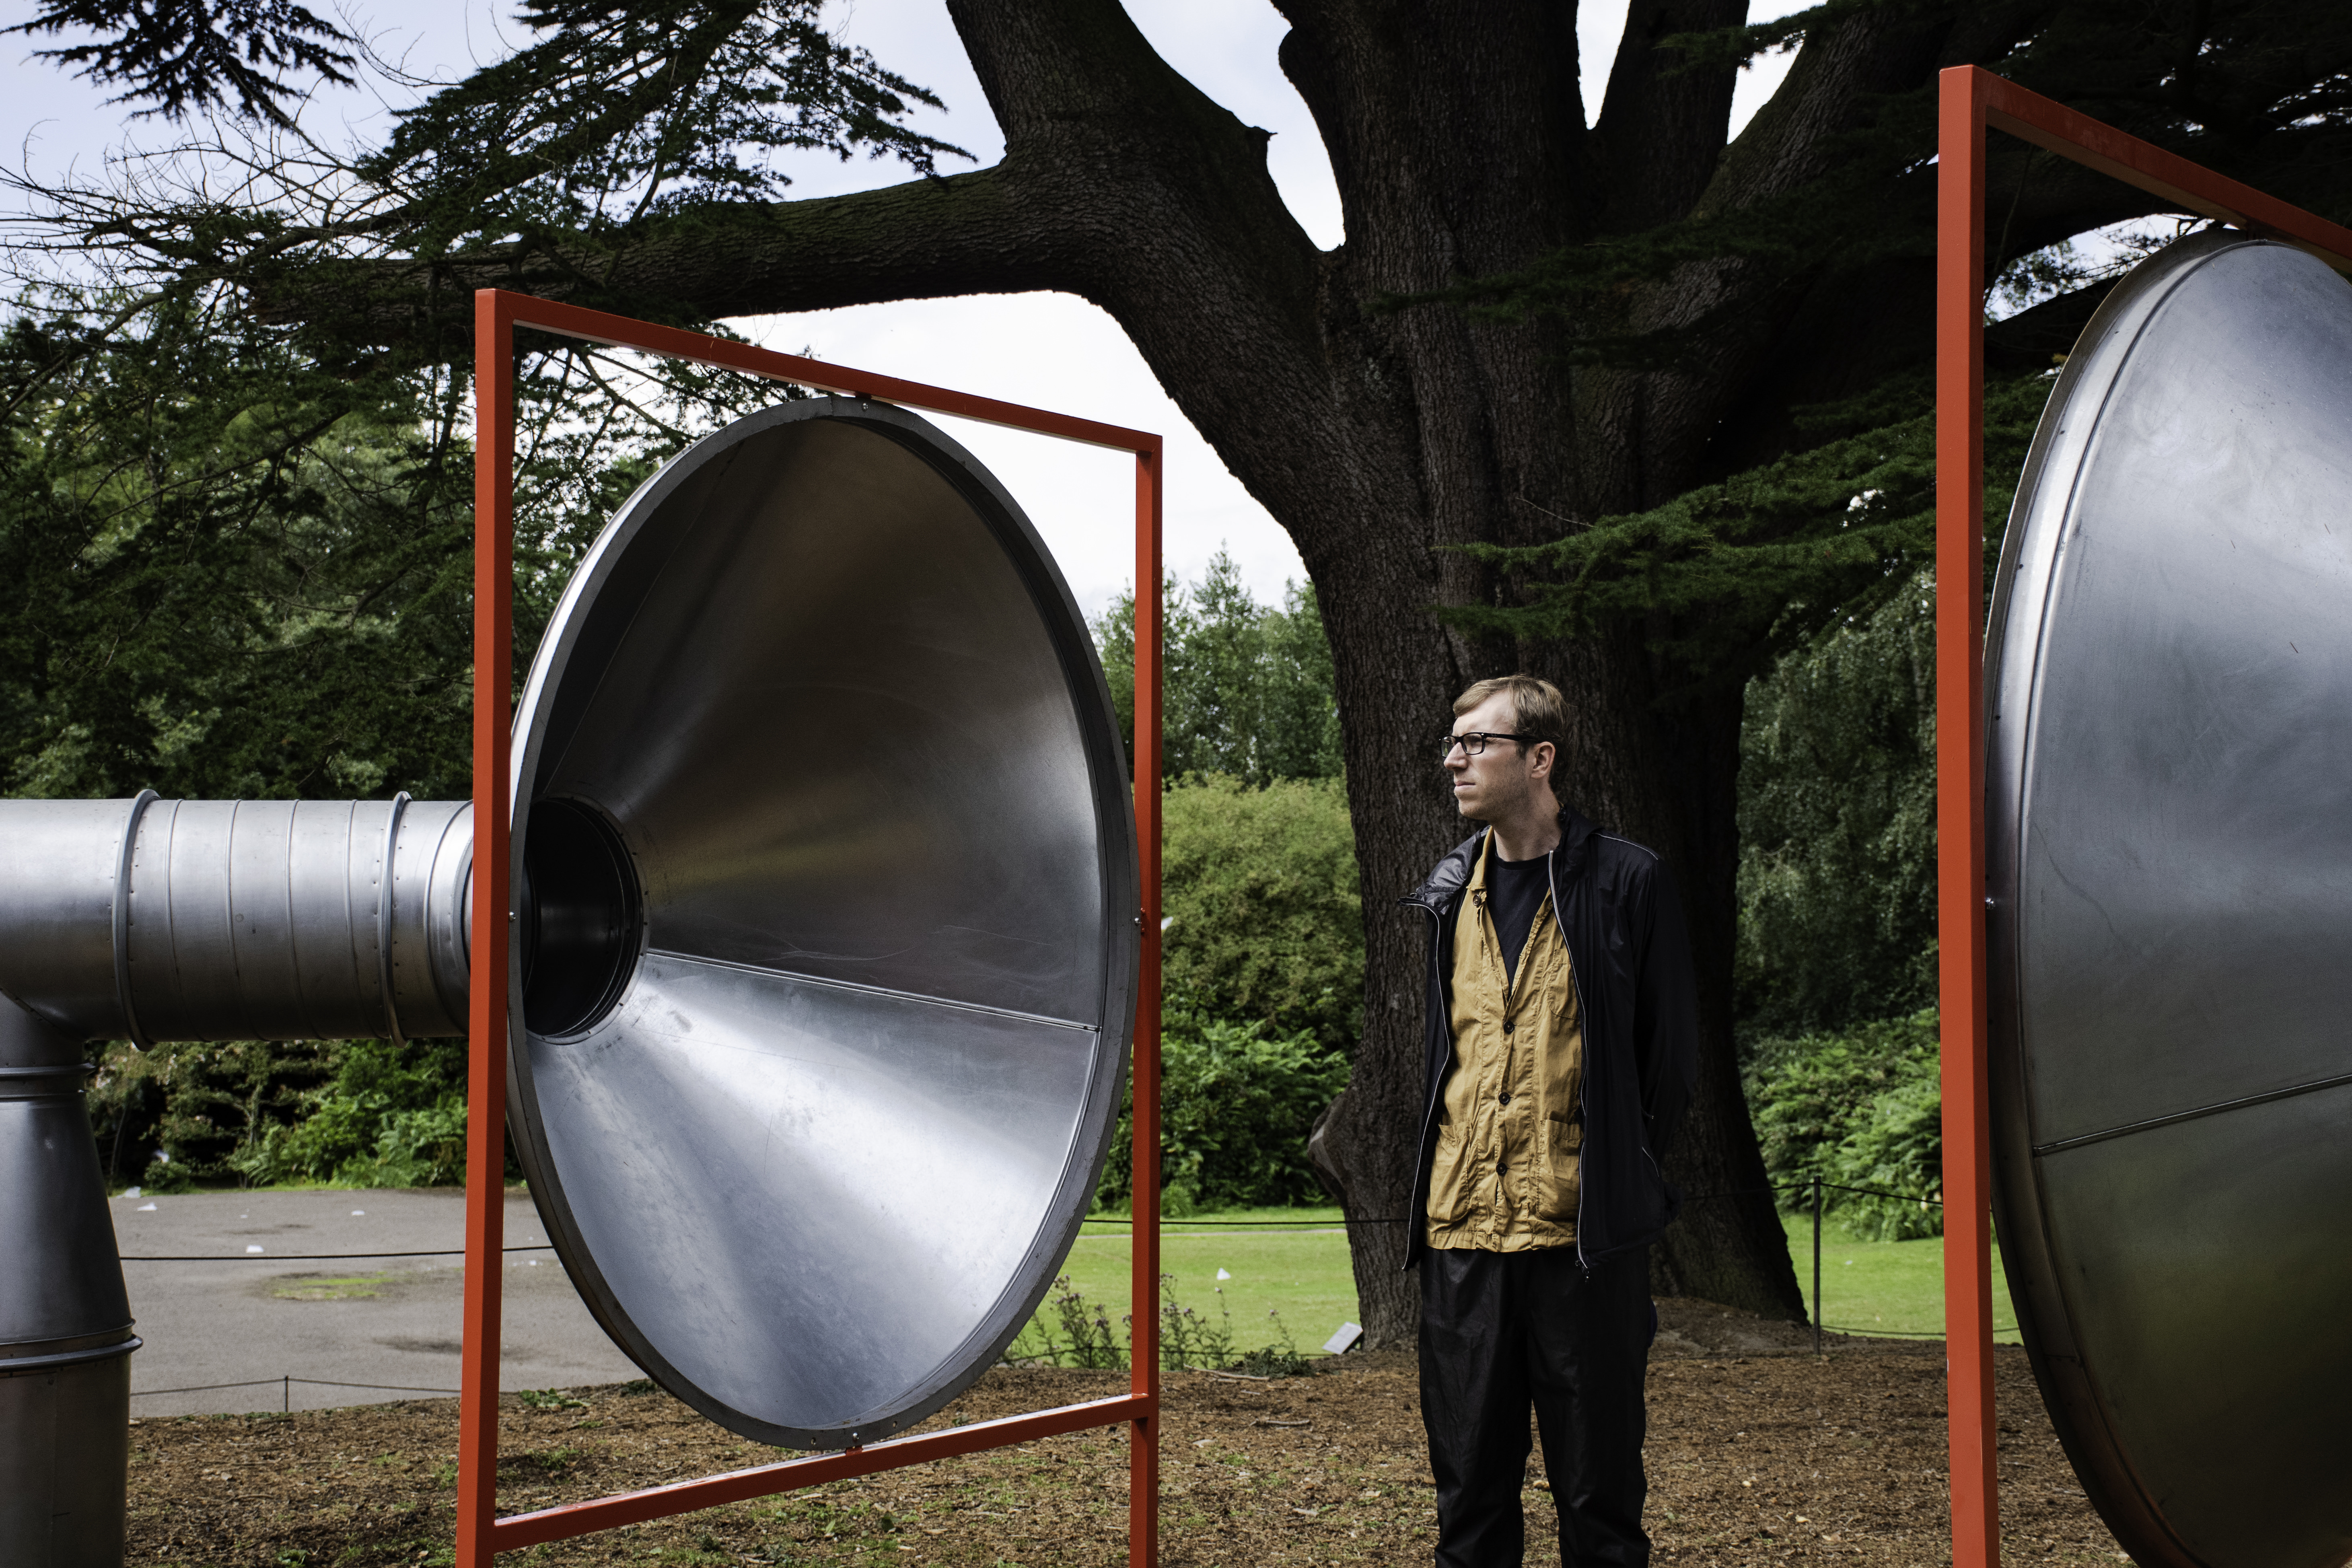 A man standing in between two giant silver tubes with red frames